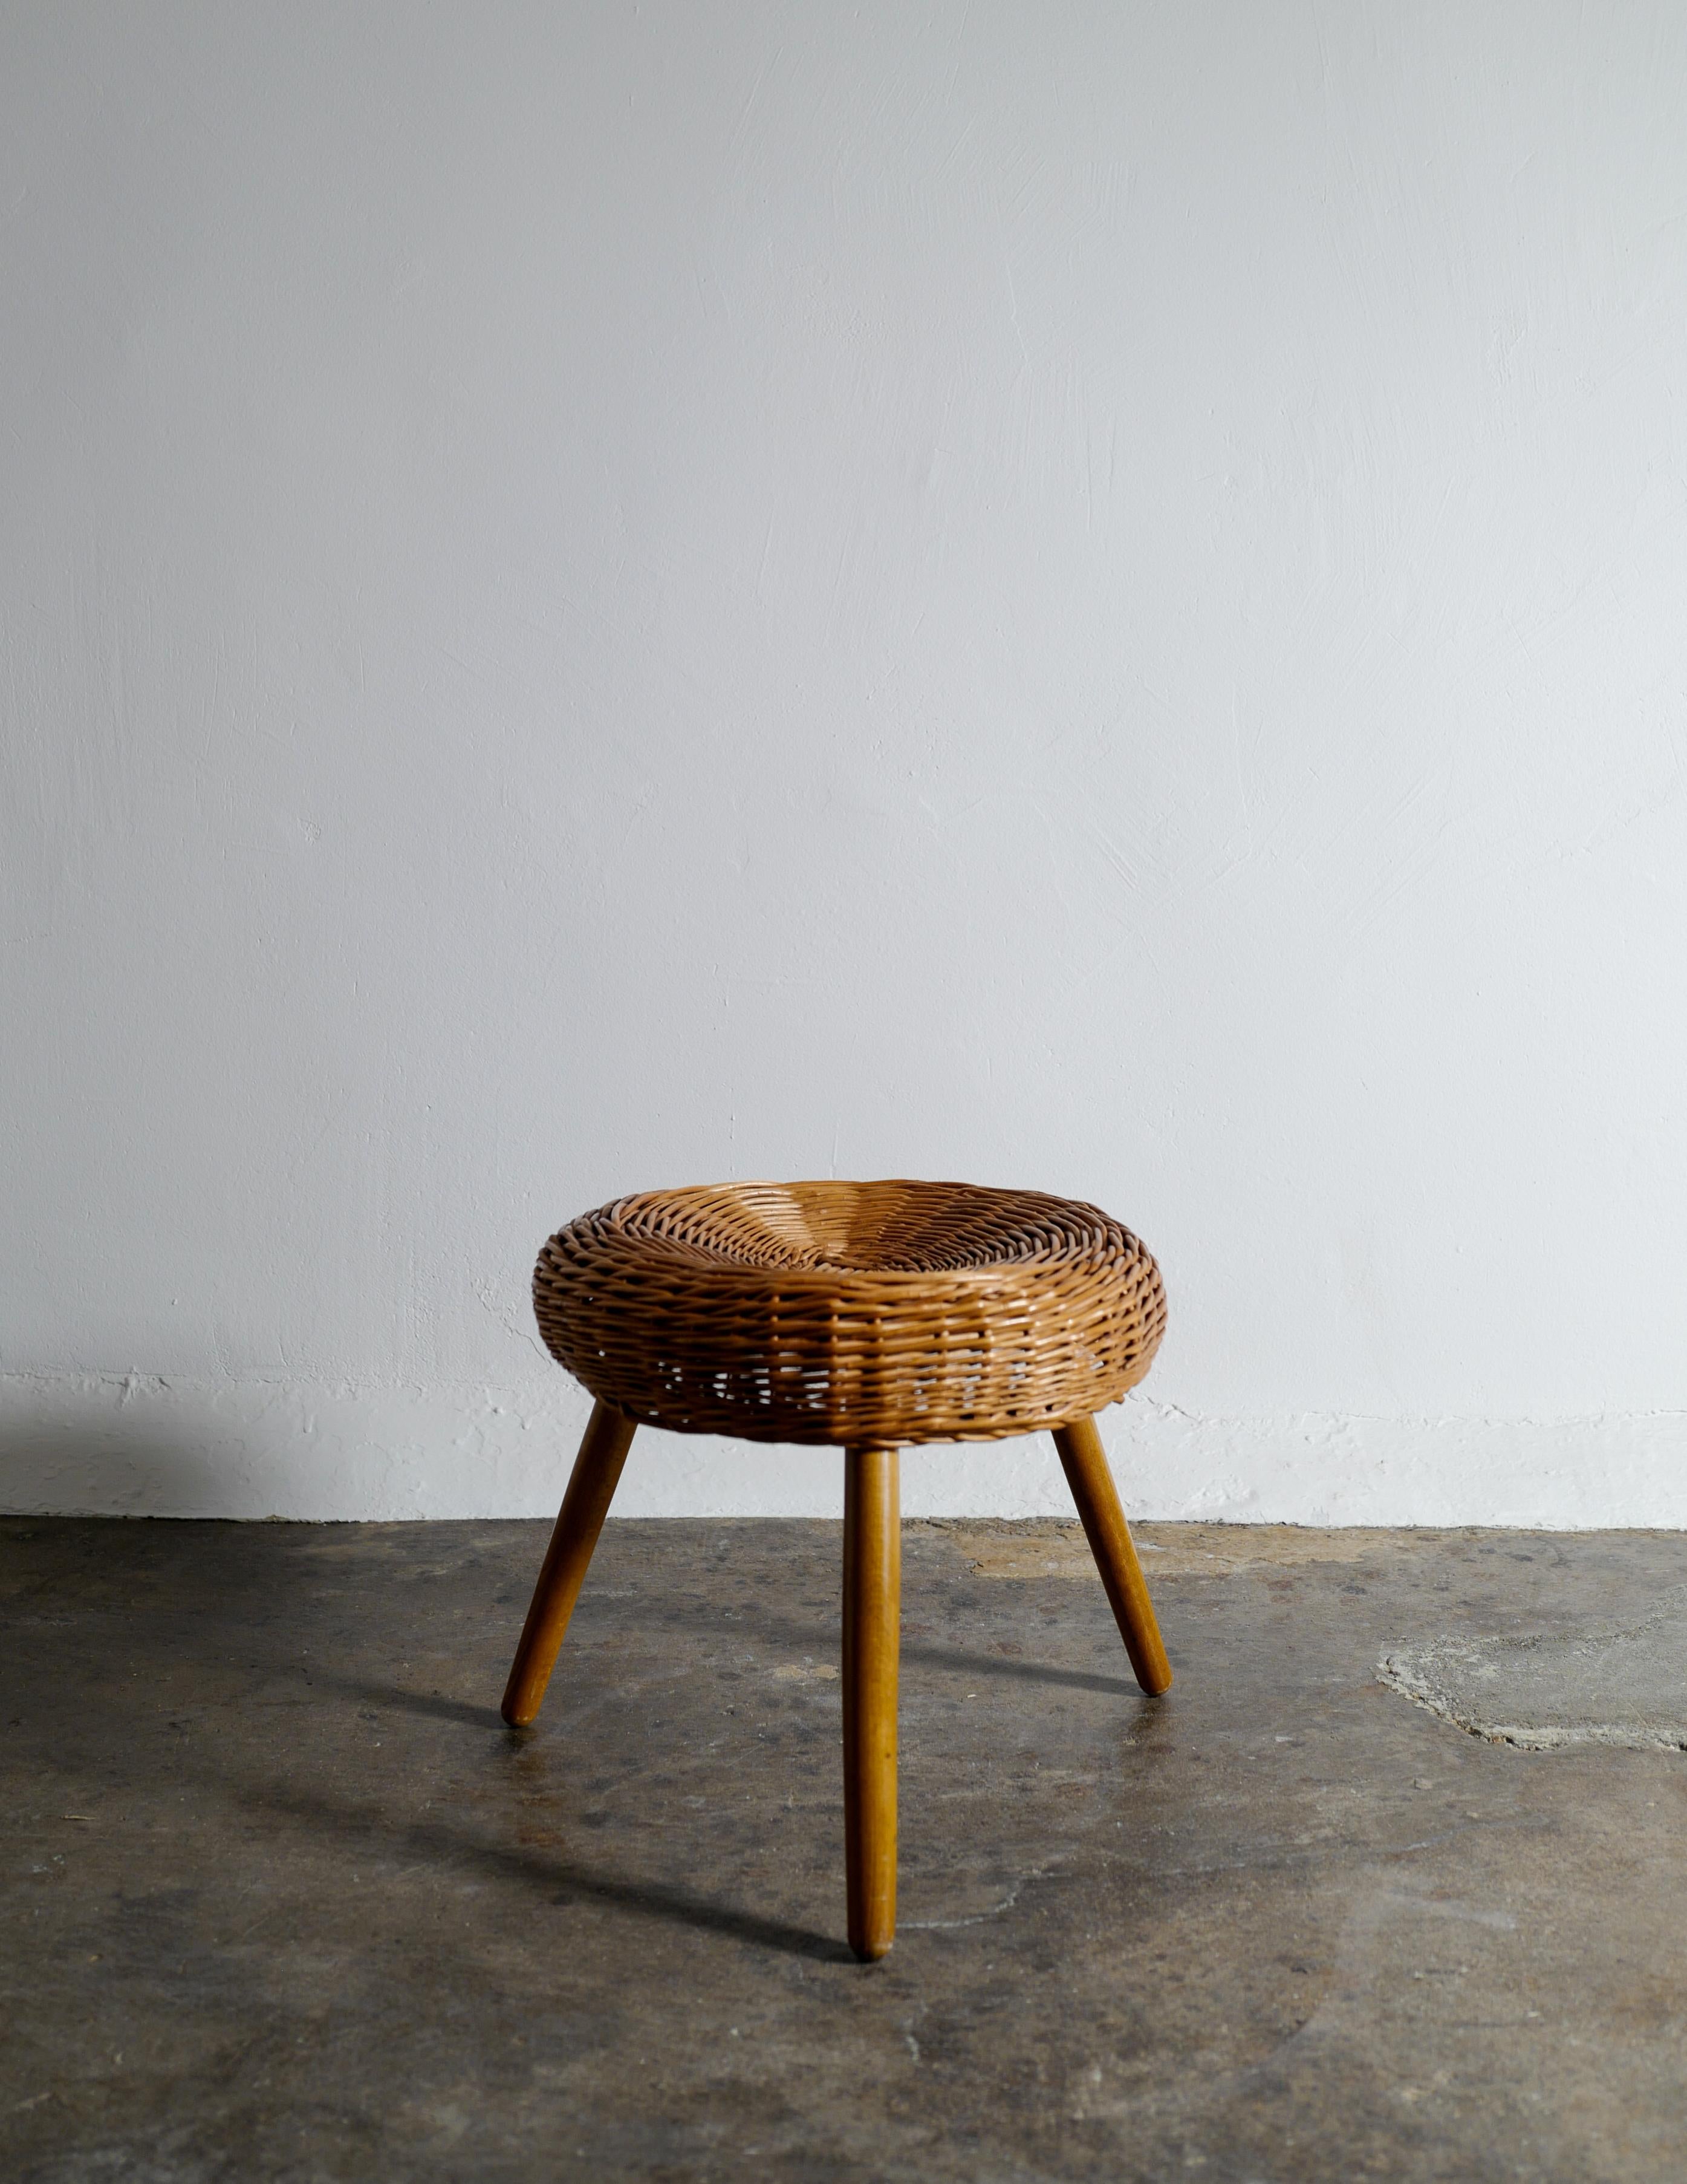 Stool in style of Tony Paul in with a rattan seating and solid wood base.
Great vintage condition, no breaks or defects.
  